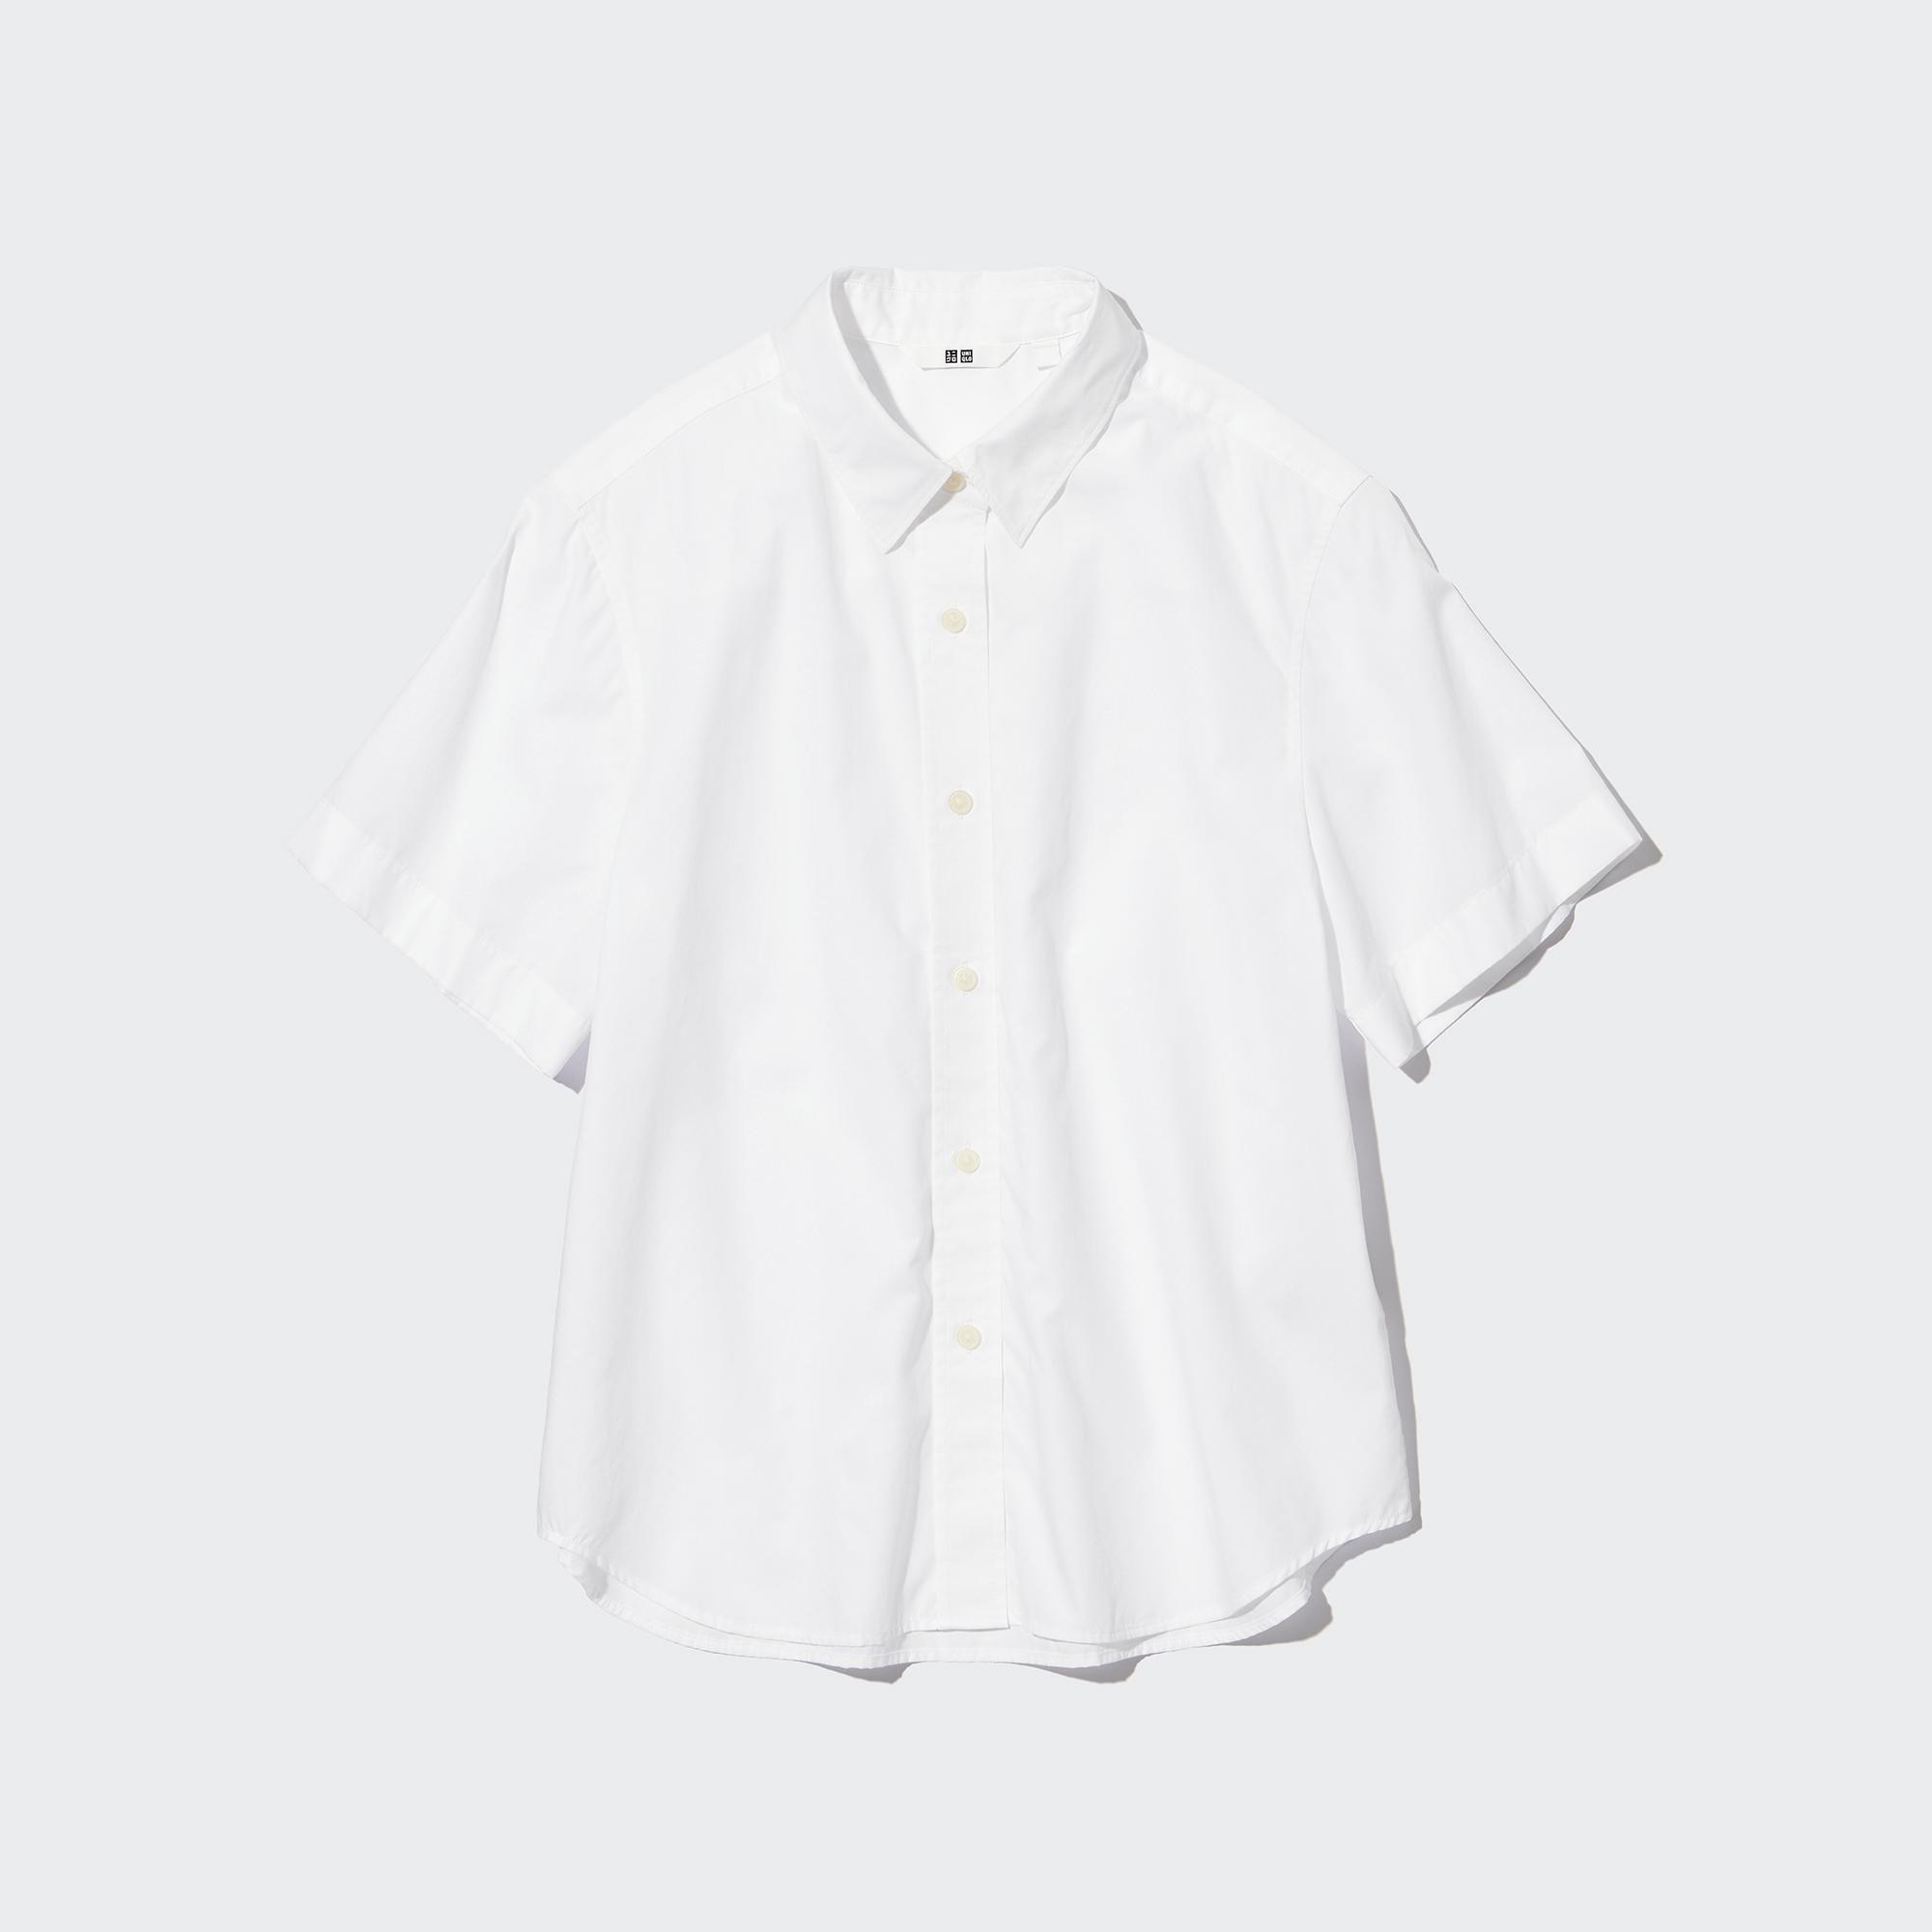 PRODUCT DETAILUNIQLO OFFICIAL ONLINE FLAGSHIP STORE